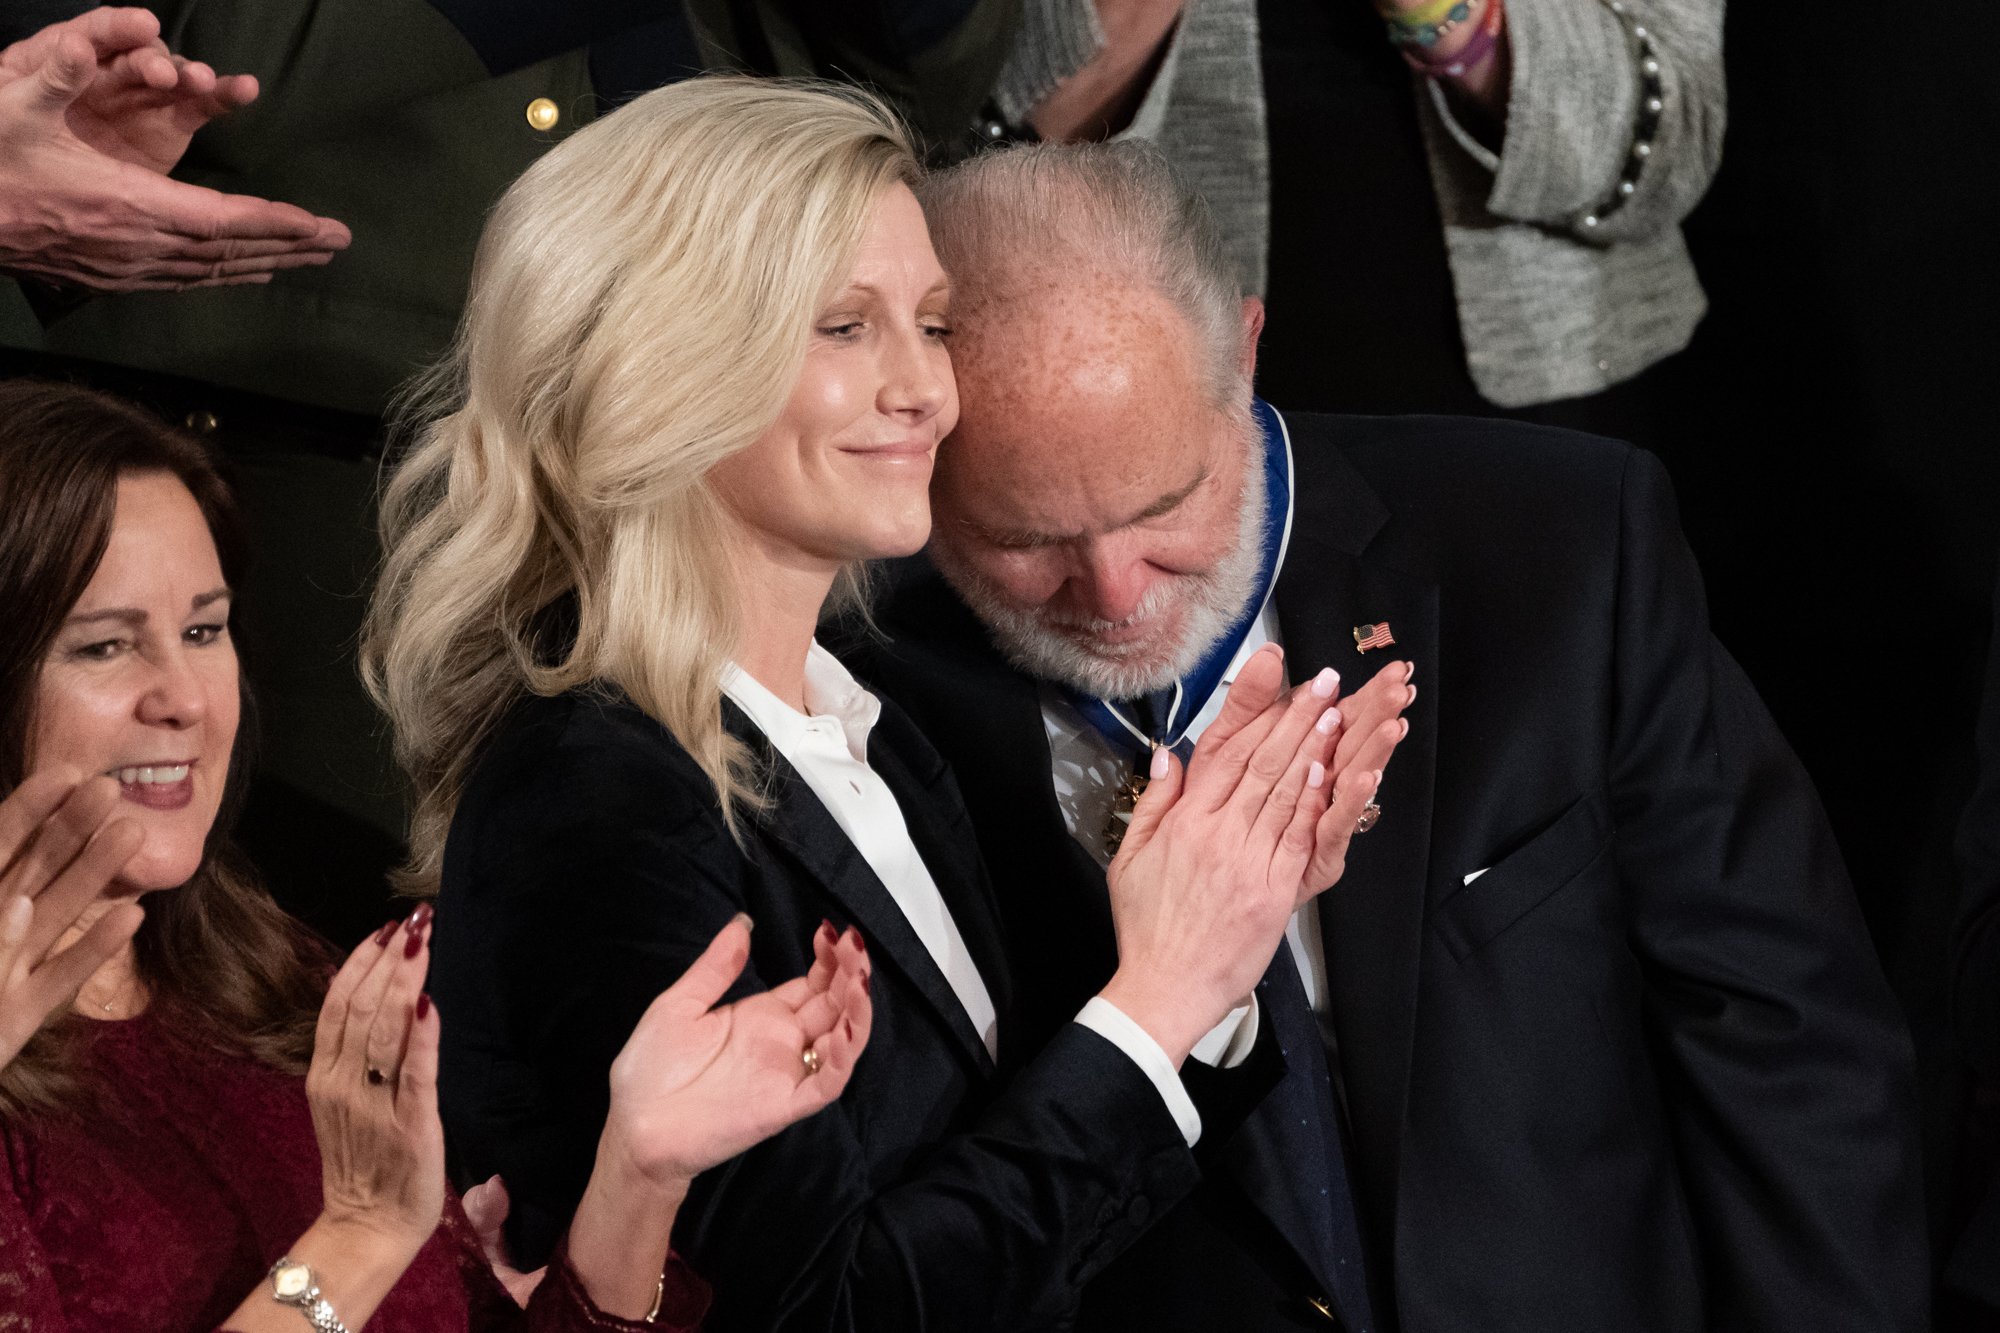 Rush Limbaugh embraces his wife Kathryn Adams Limbaugh at the State of the Union address at the U.S. Capitol in Washington, D.C. | Source: Andrea Hanks on Flicker 